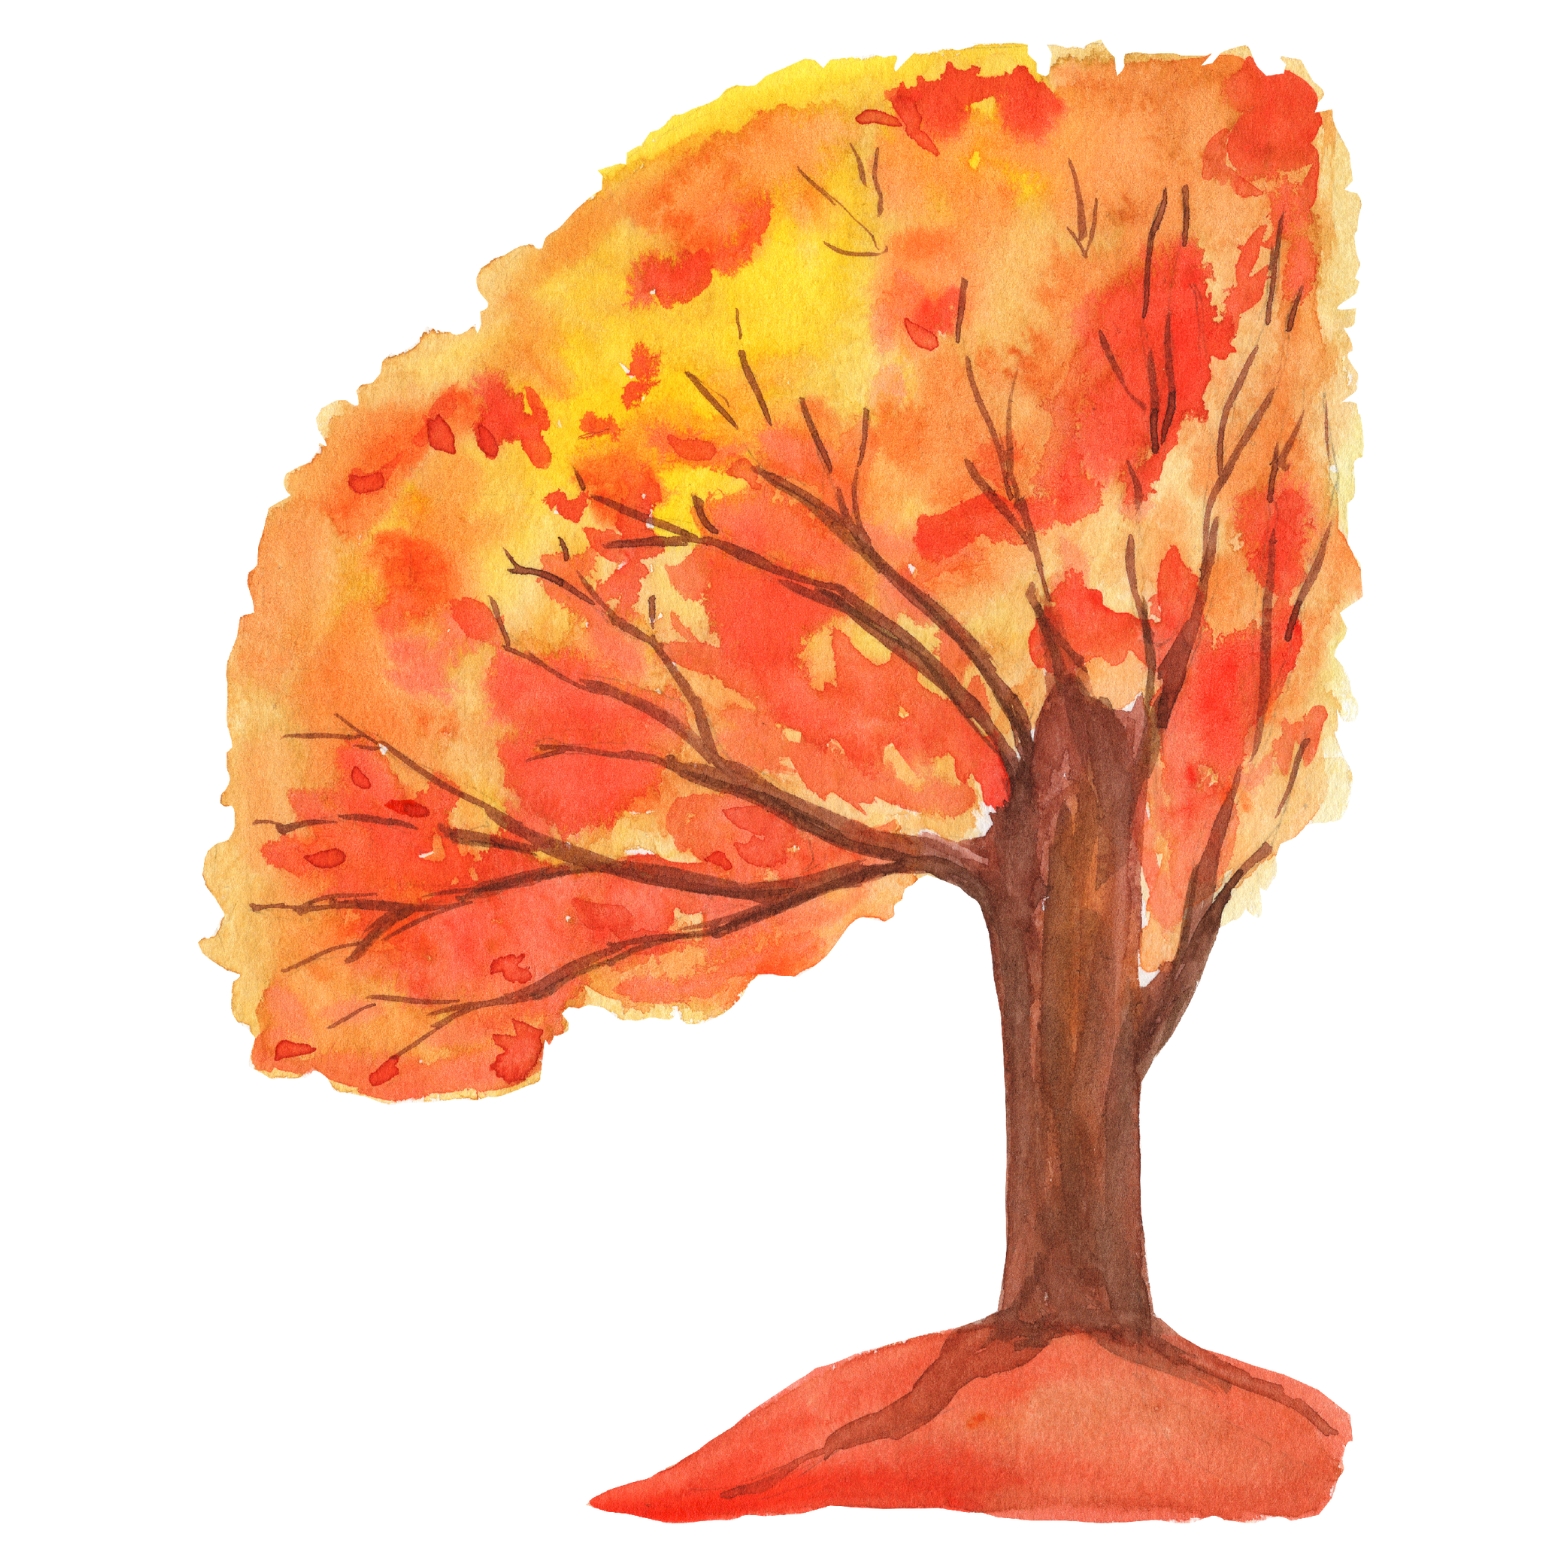 Watercolor painting of a tree with orange and yellow leaves.